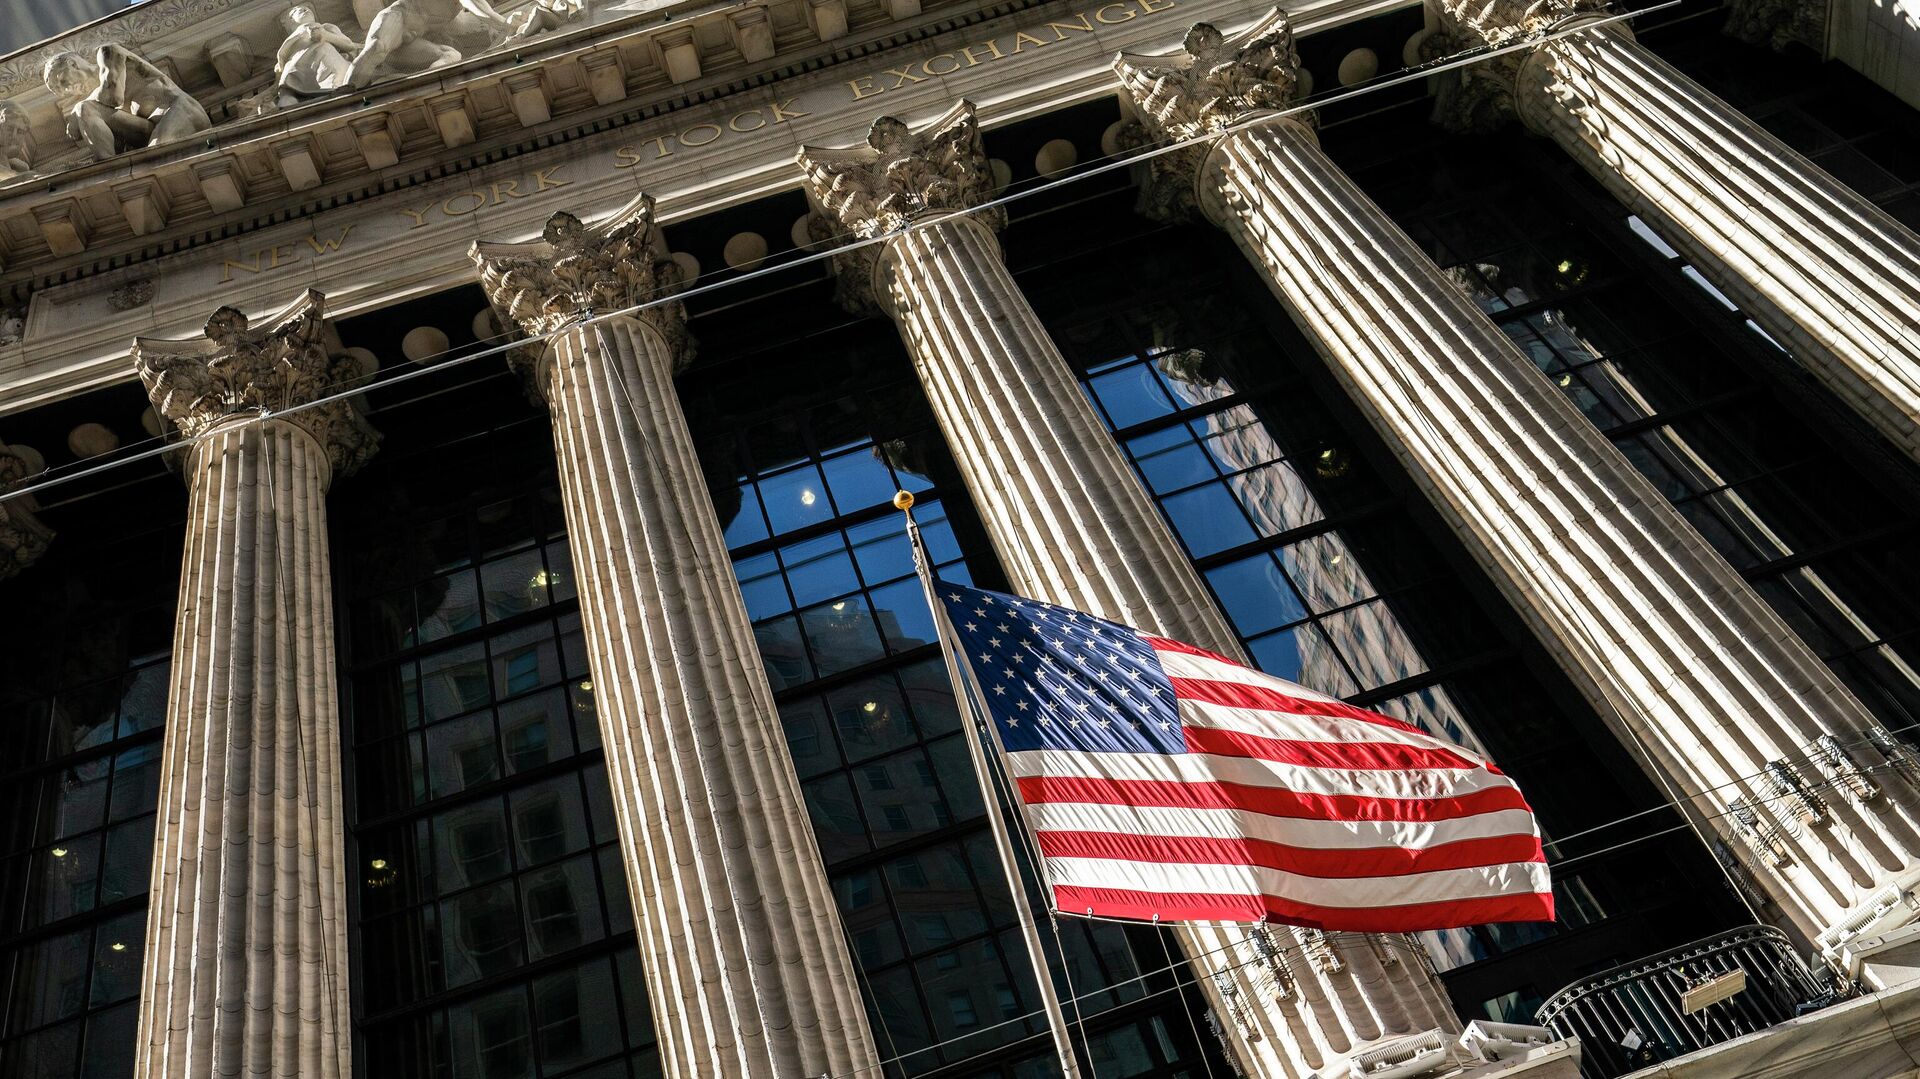 A U.S. flag waves outside the New York Stock Exchange, Monday, Jan. 24, 2022, in New York. Stocks are drifting between small gains and losses in the early going on Wall Street Tuesday, May 3, 2022 as investors await Wednesday's decision by the Federal Reserve on interest rates. The Fed is expected to raise its benchmark rate by twice the usual amount this week as it steps up its fight against inflation, which is at a four-decade high. - Sputnik International, 1920, 05.07.2022